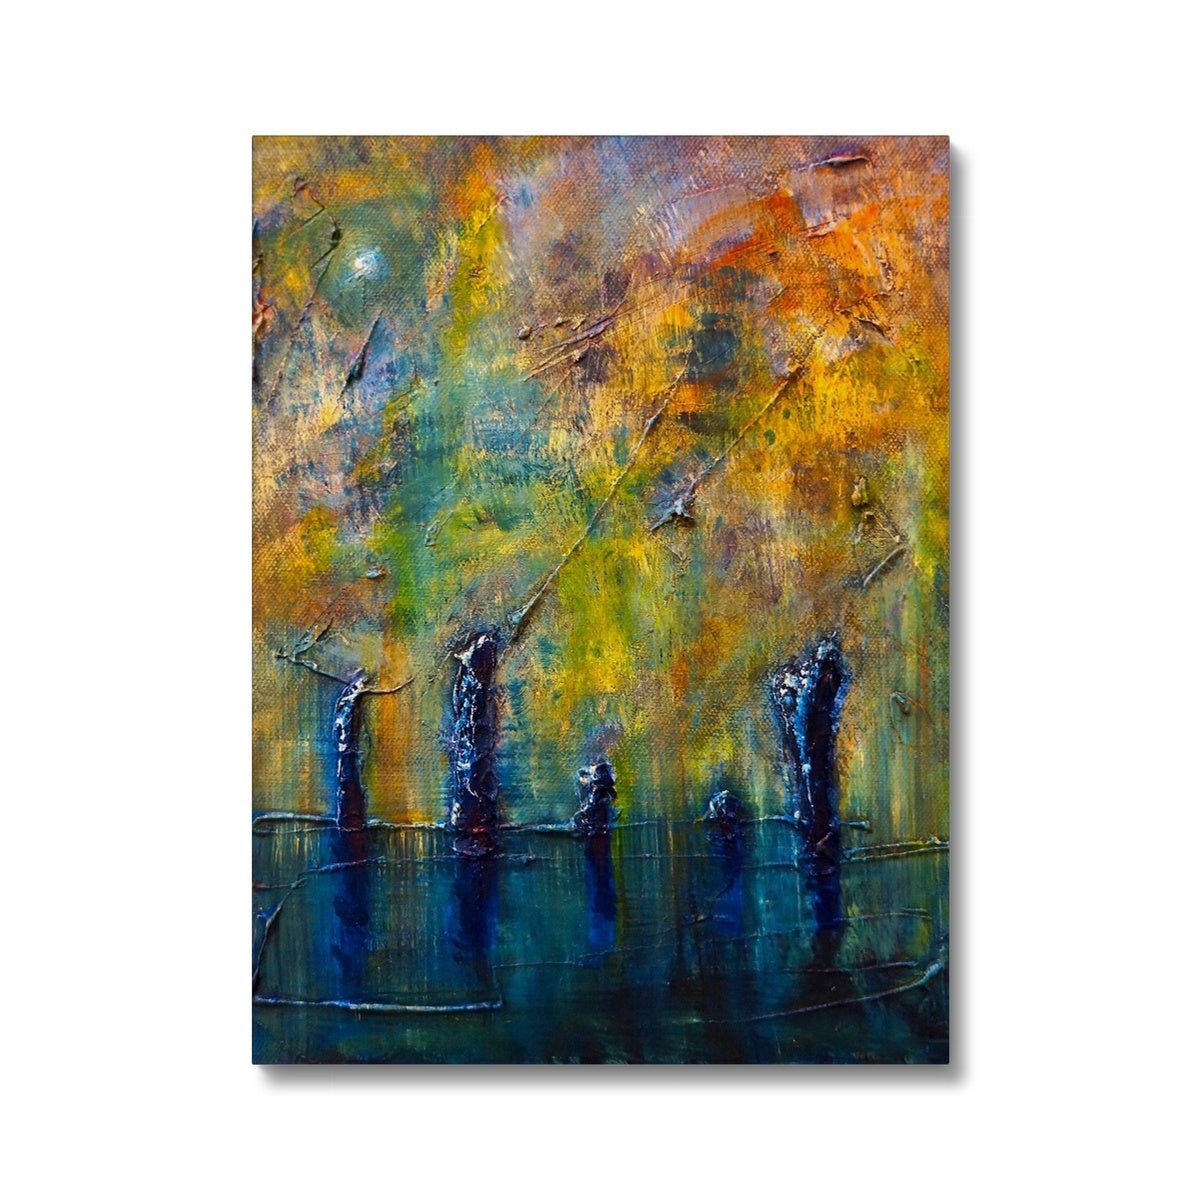 Stenness Moonlight Orkney Painting | Canvas From Scotland-Contemporary Stretched Canvas Prints-Orkney Art Gallery-18"x24"-Paintings, Prints, Homeware, Art Gifts From Scotland By Scottish Artist Kevin Hunter